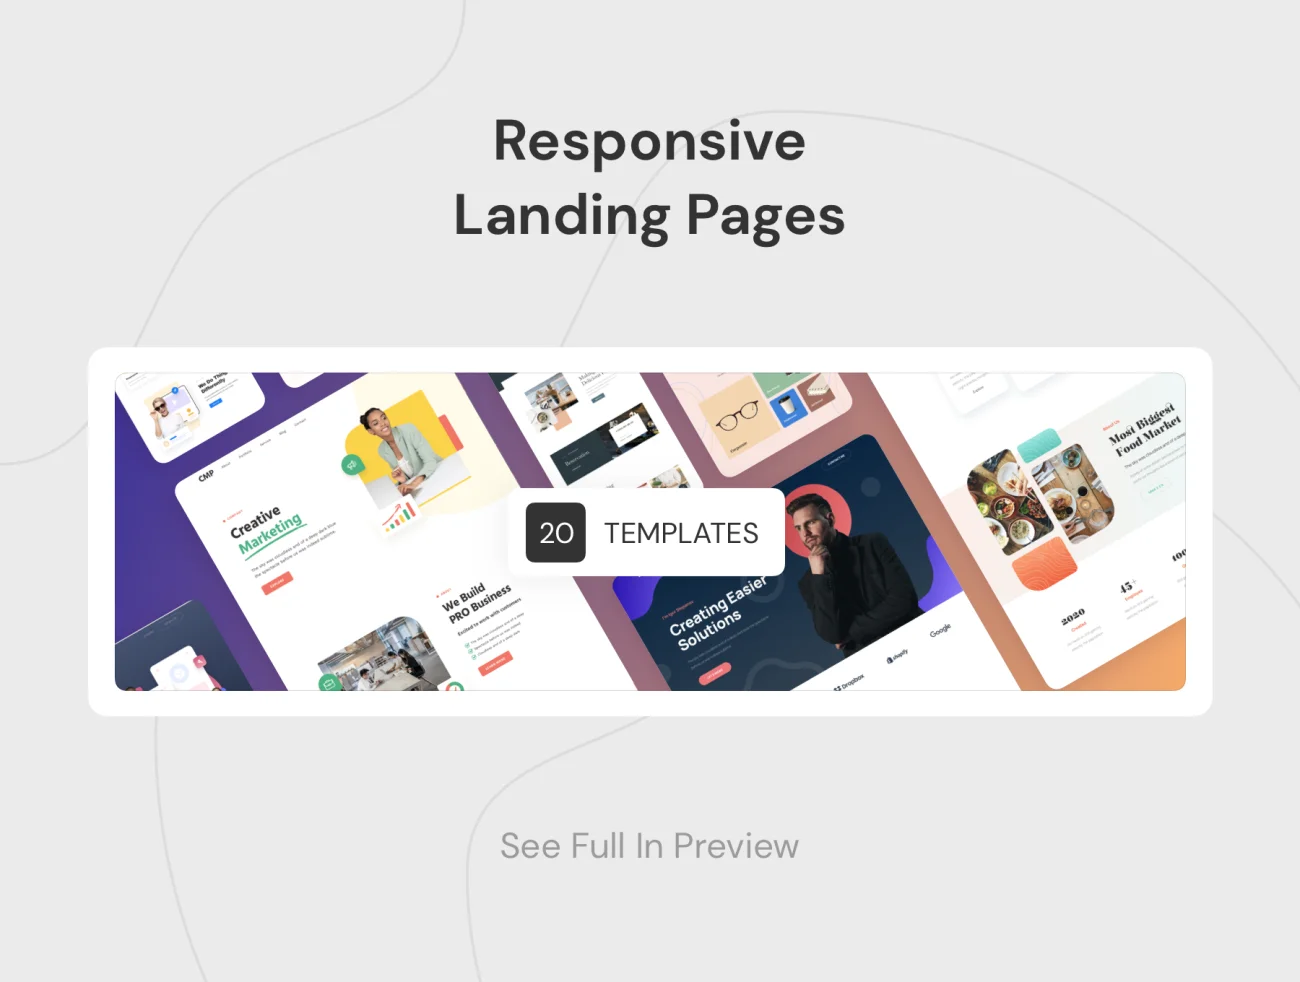 AProject - Responsive Landing Pages 响应式登录页-UI/UX-到位啦UI